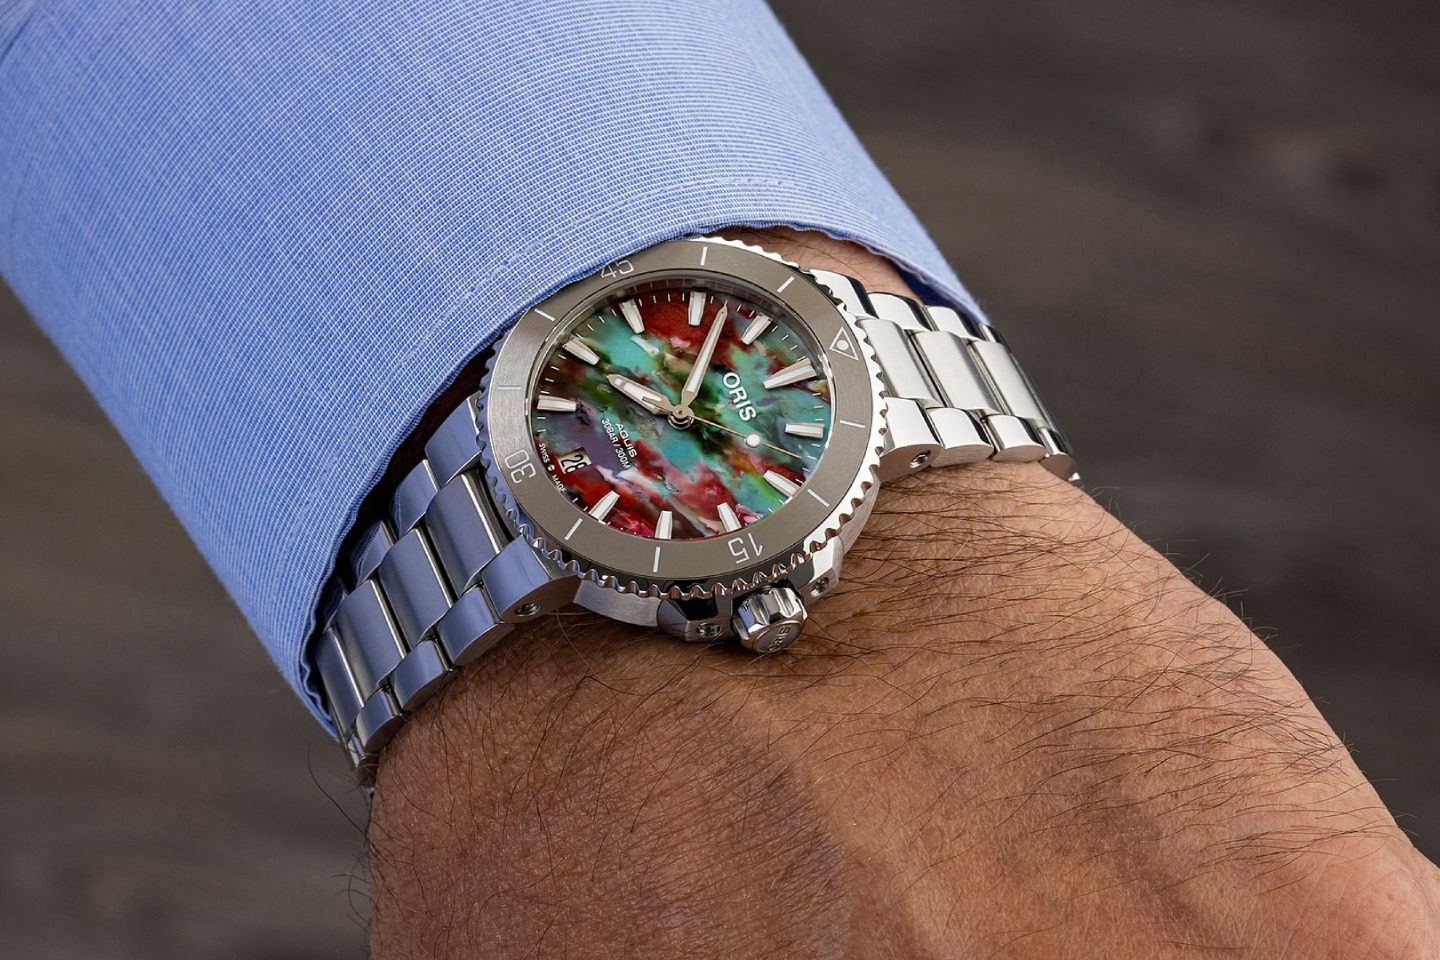 The dial of the Oris Aquis Date Upcycle is made from recycled PET bottles.